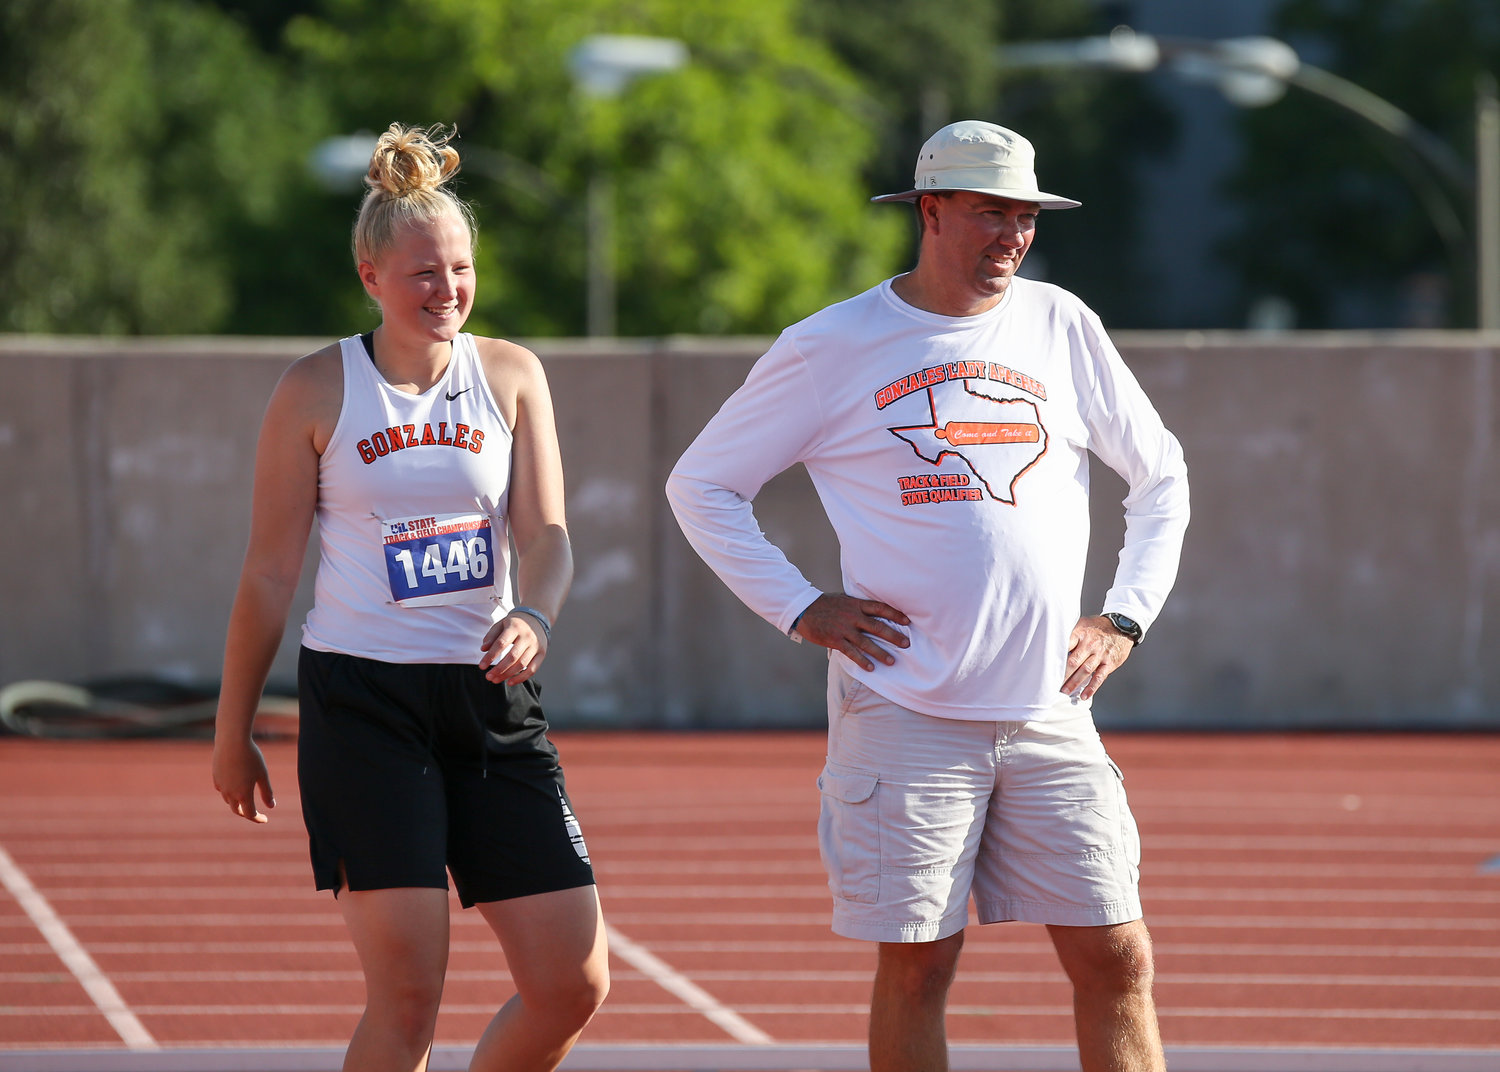 Devon Williams of Gonzales High School competes in the Class 4A girls shot put event at the UIL State Track and Field Meet at Mike A. Myers Stadium in Austin, Texas on Friday, May 11, 2018. Head Coach Cully Doyle (pictured on the right) has expectations of getting back to the state meet.